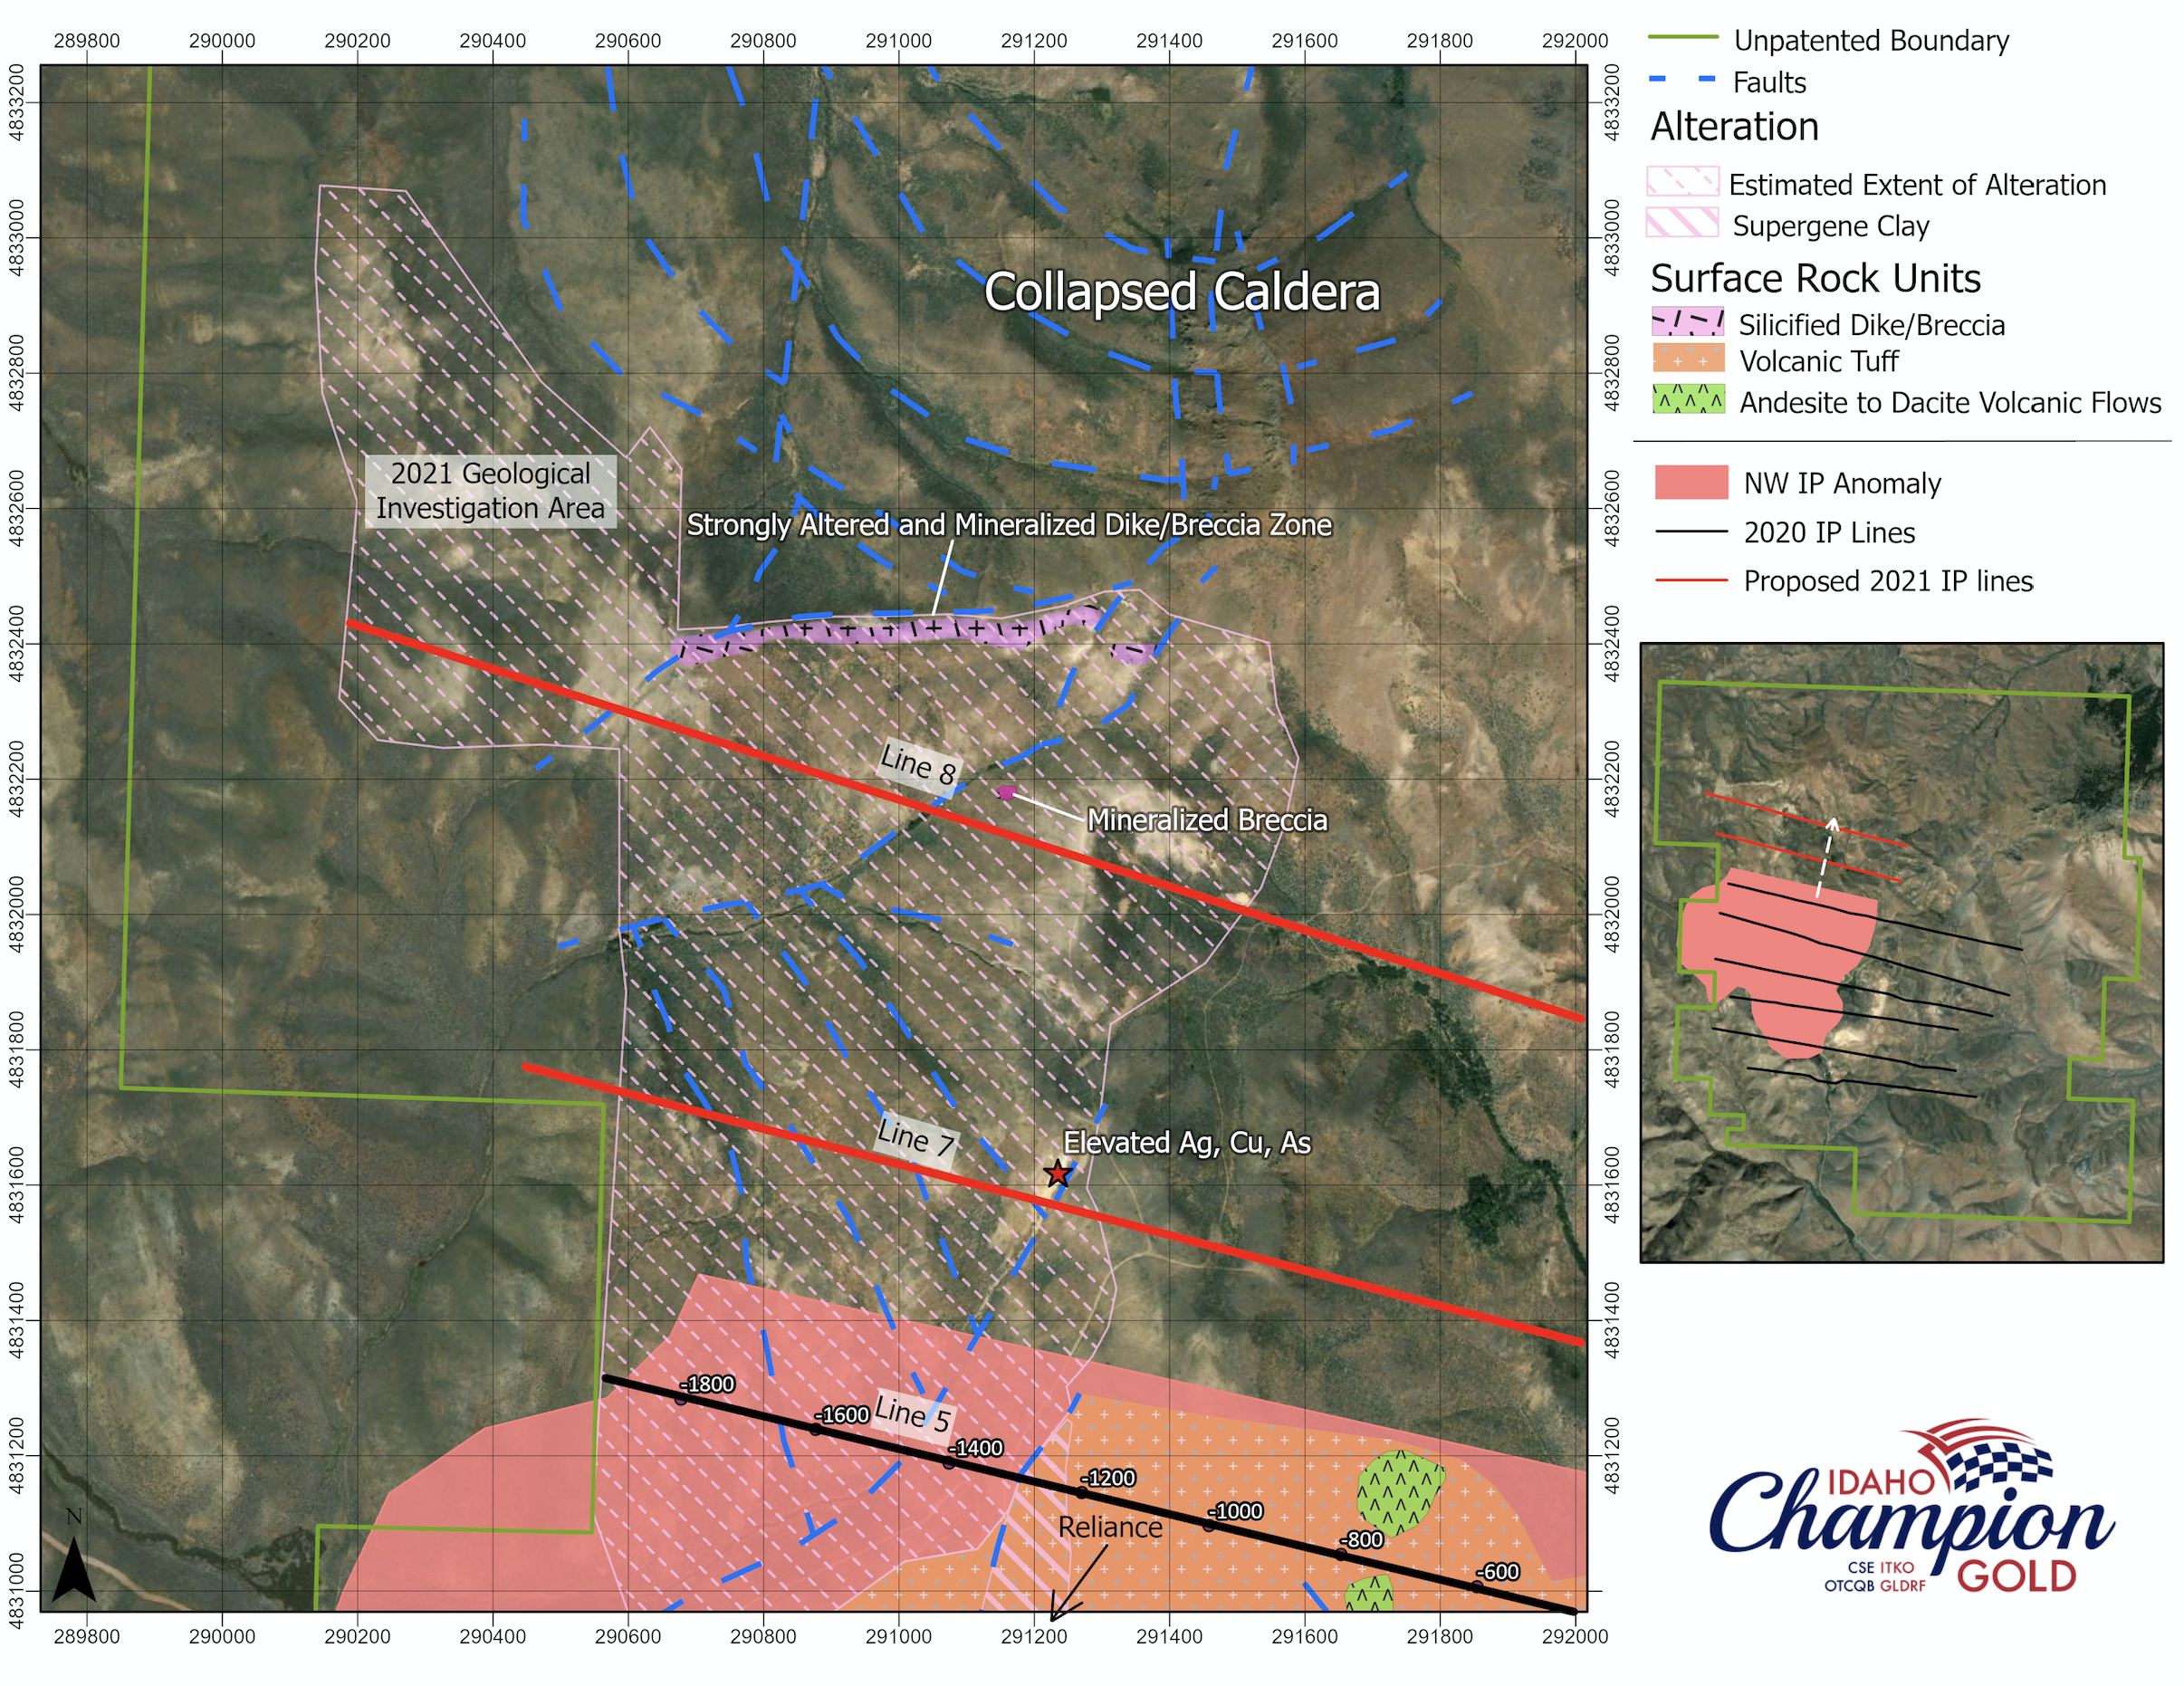 Idaho Champion Gold Mines Canada Inc., Wednesday, May 12, 2021, Press release picture